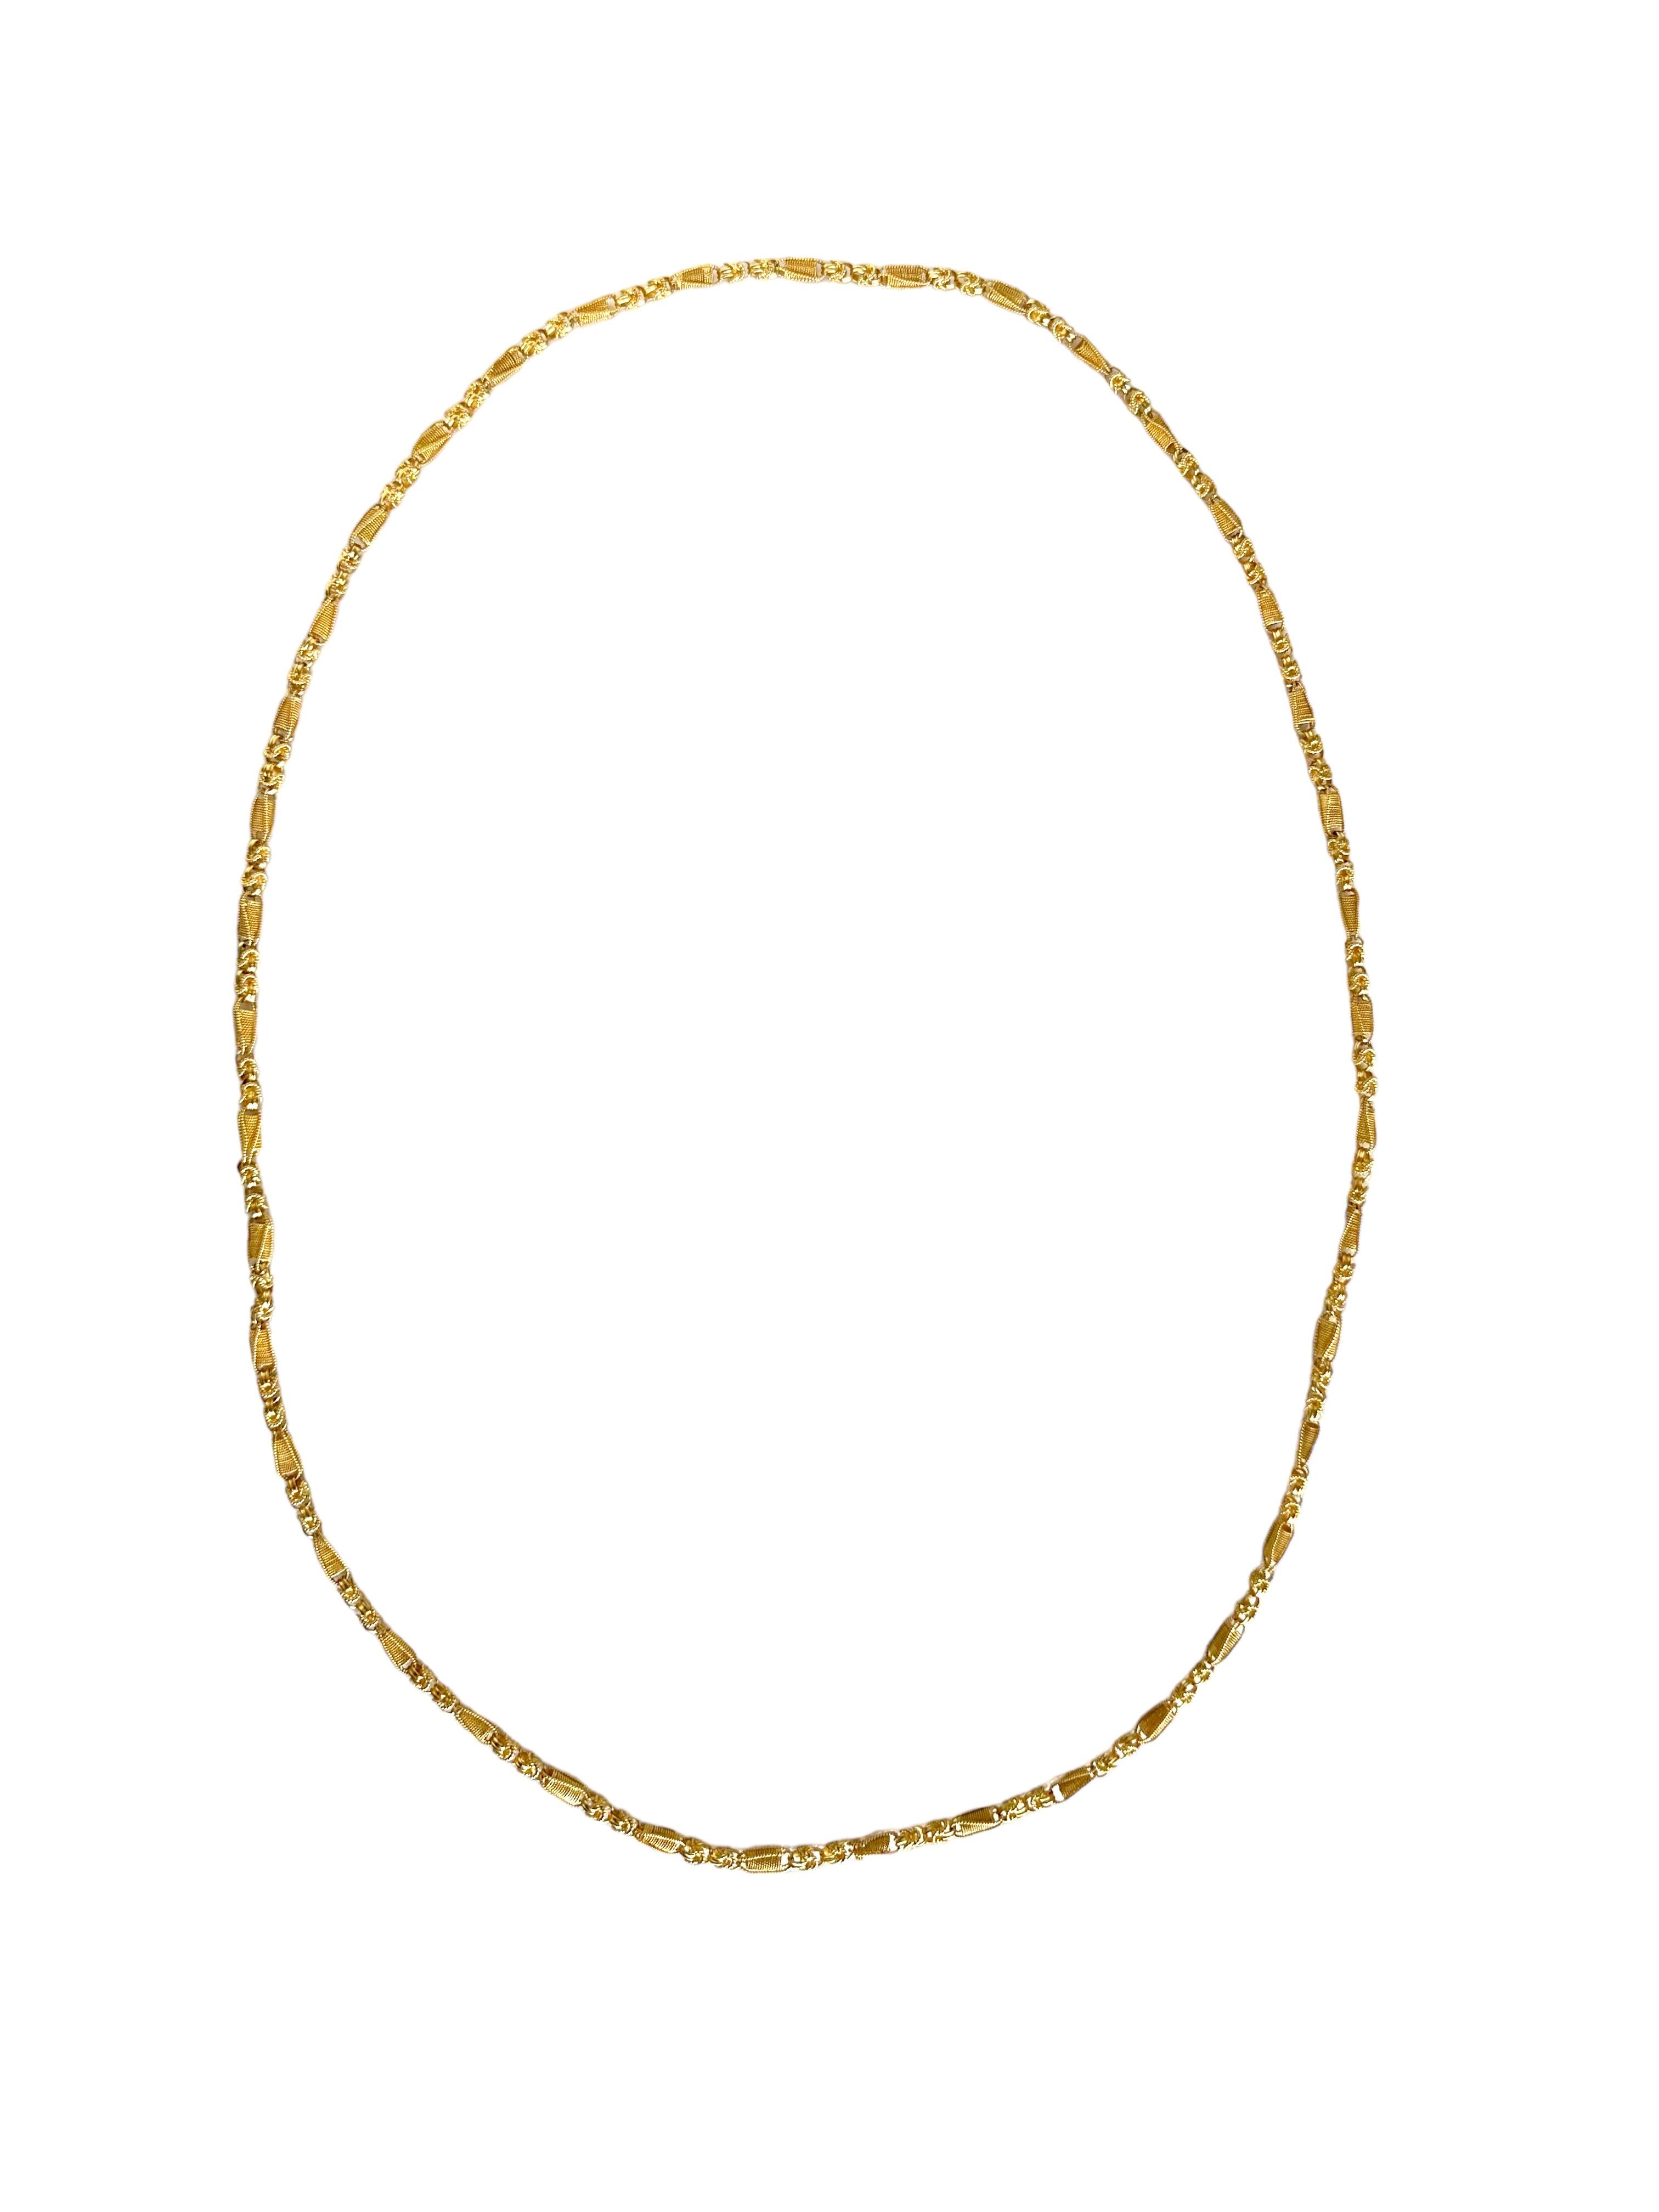 24K Gold Handmade Late Victorian French Link Necklace In Excellent Condition For Sale In West Palm Beach, FL